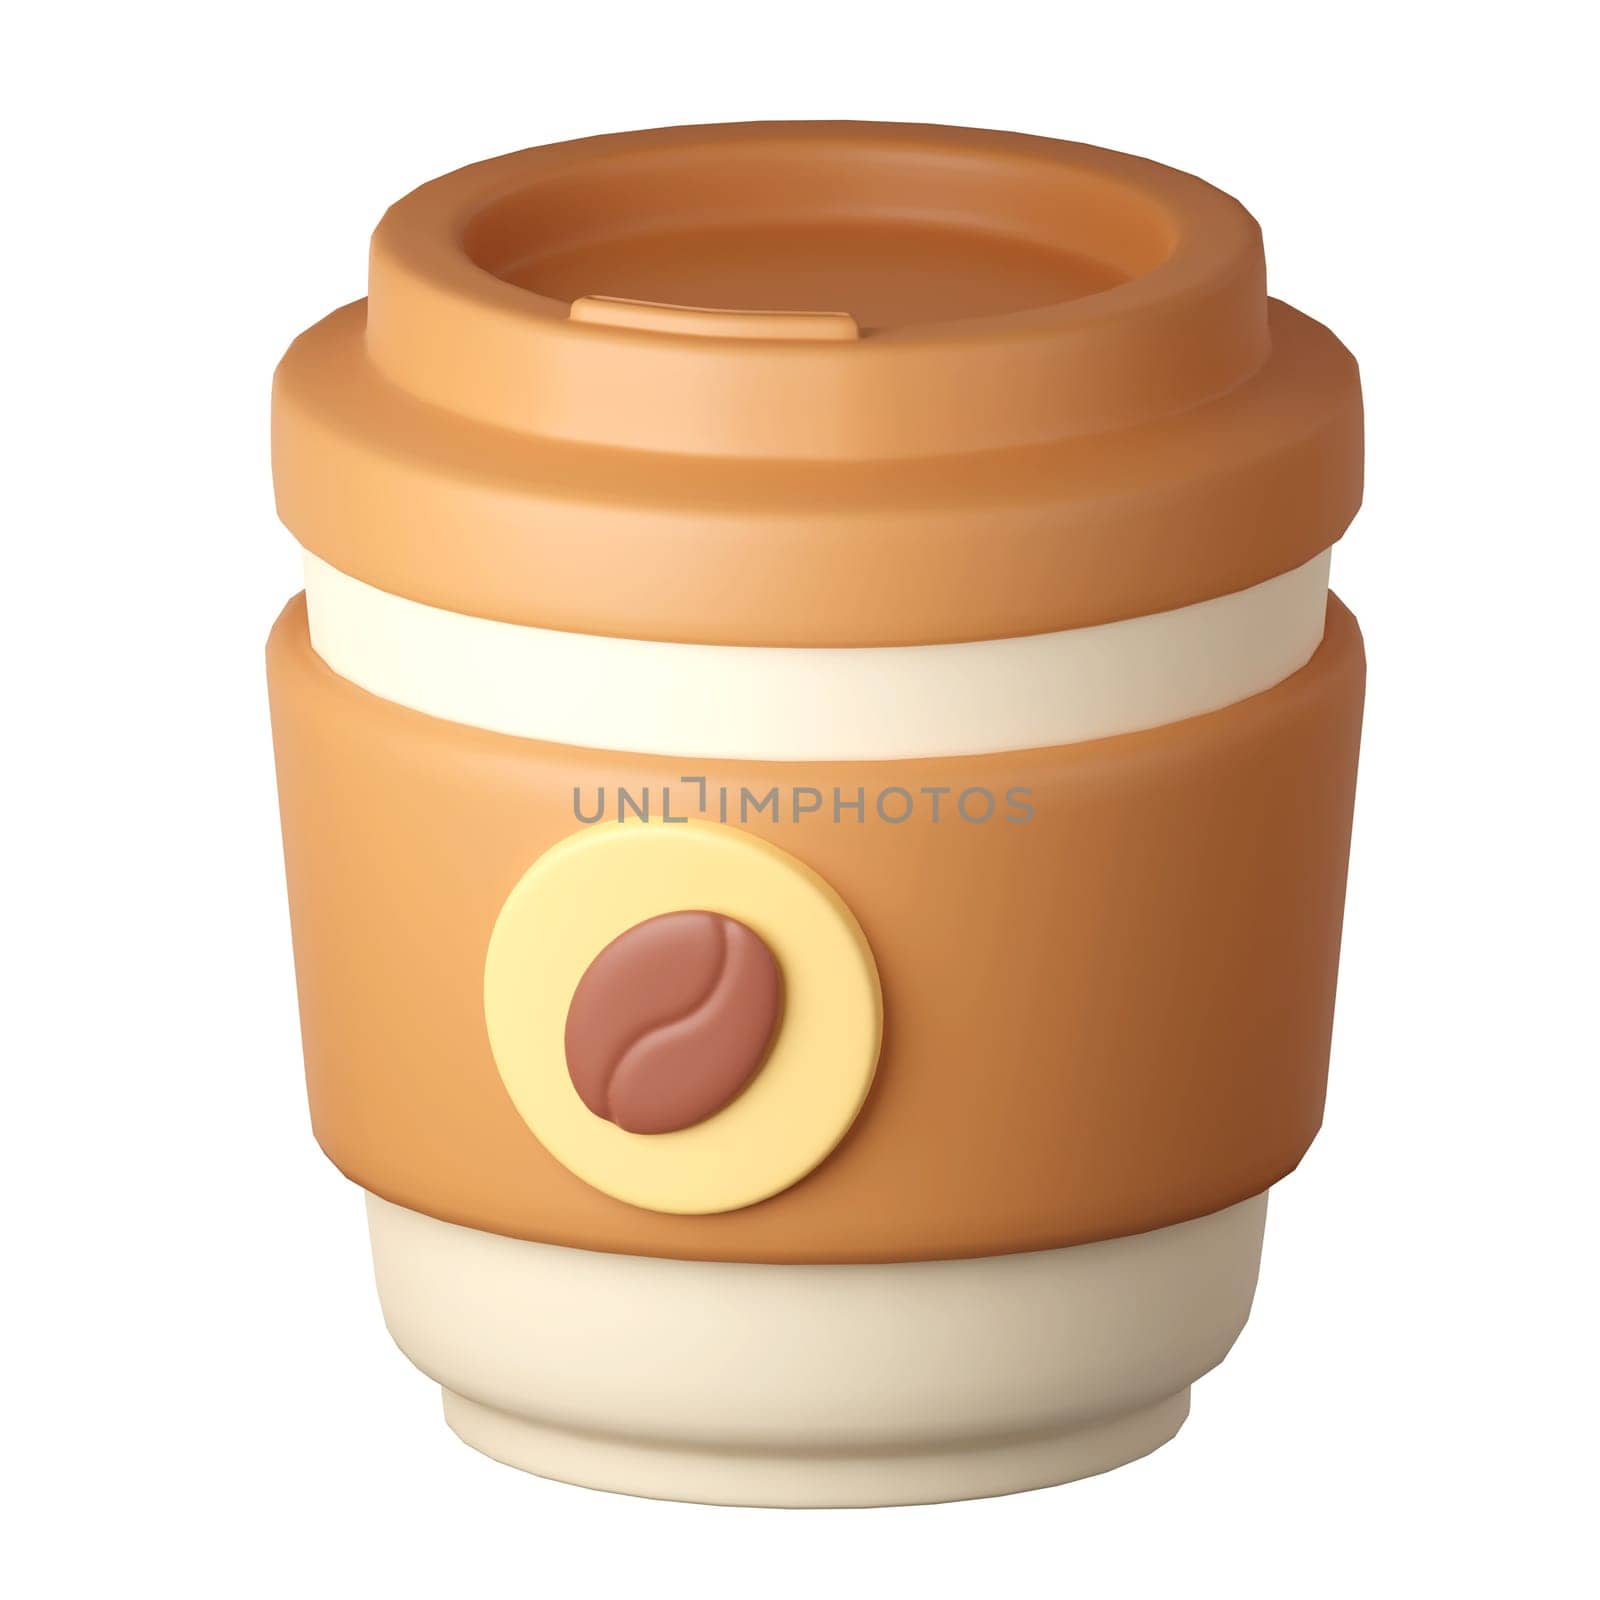 a coffee mug Cartoon Style Isolated on a White Background. 3d illustration.